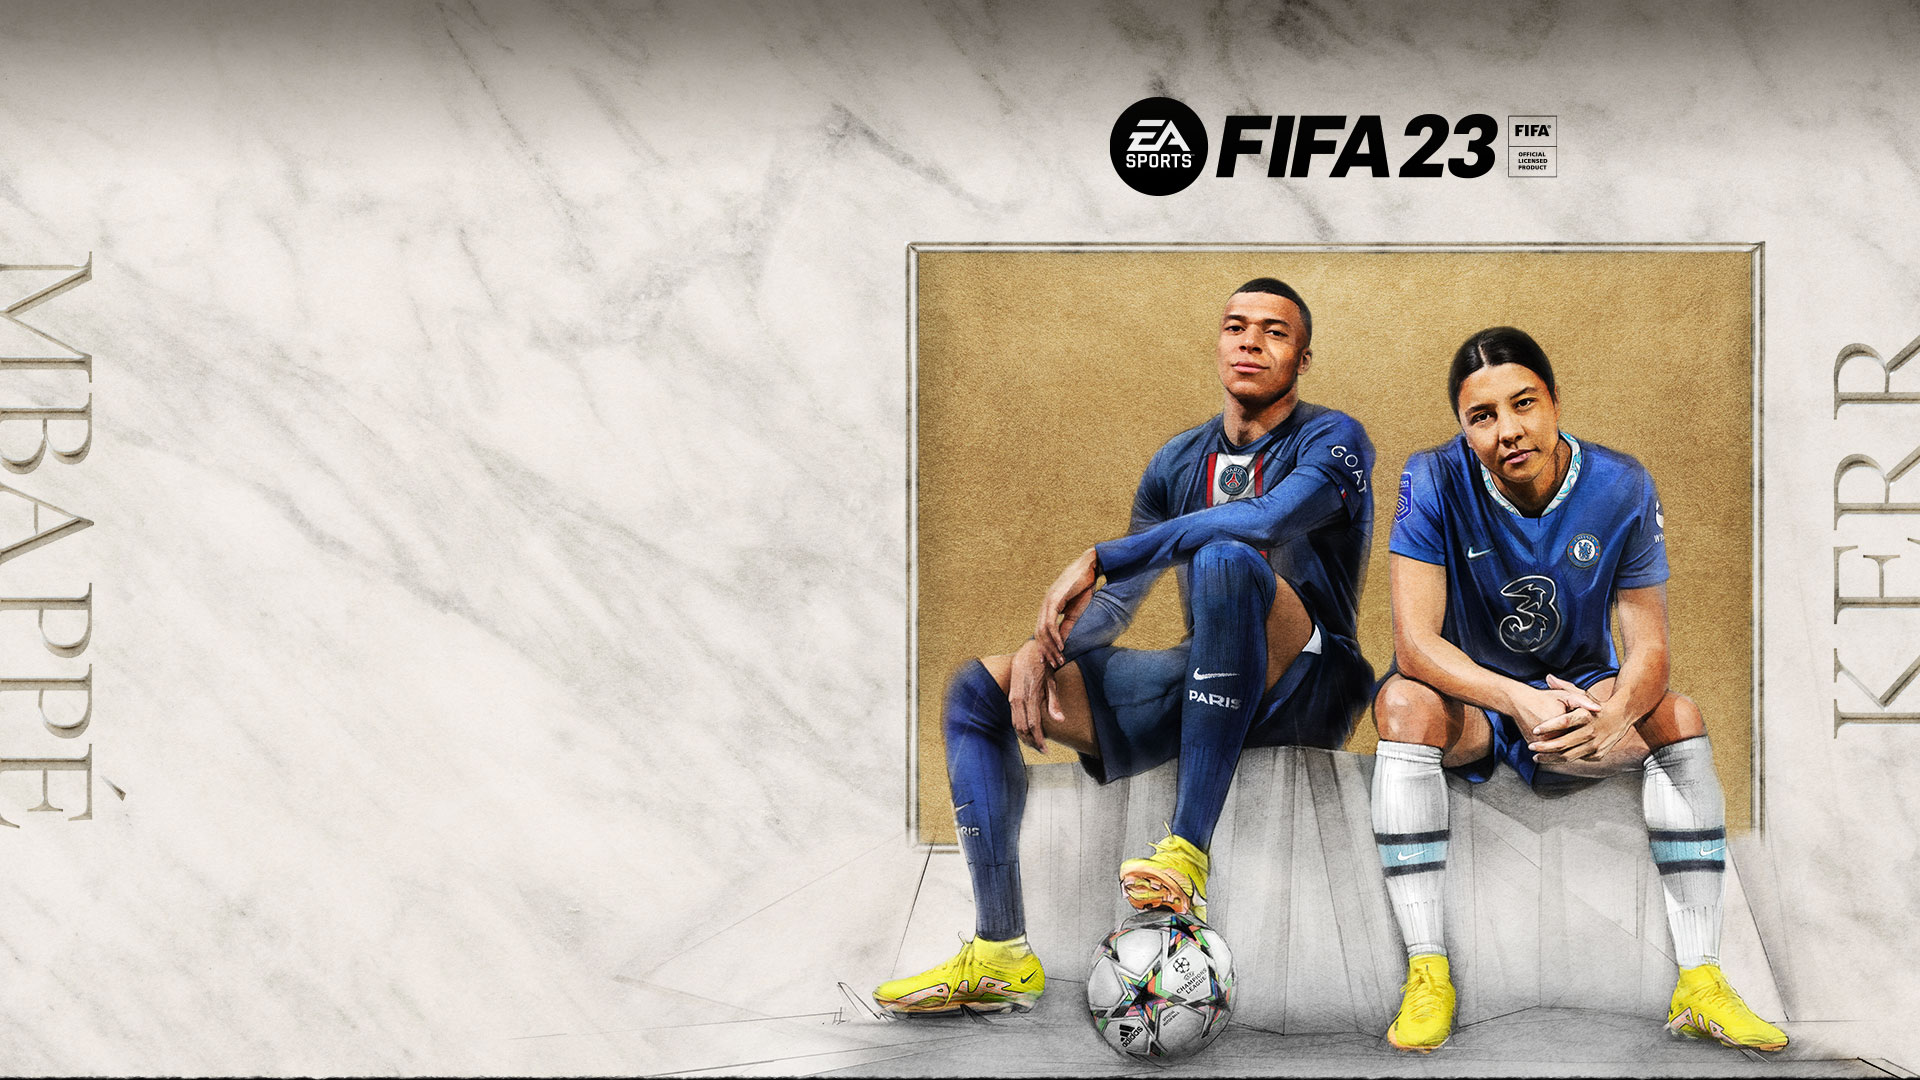 EA SPORTS FIFA 23, FIFA Official Licensed Product, Ultimate Edition, Mbappe, Kerr, two players sit on a cloth-covered bench in front of a corkboard.